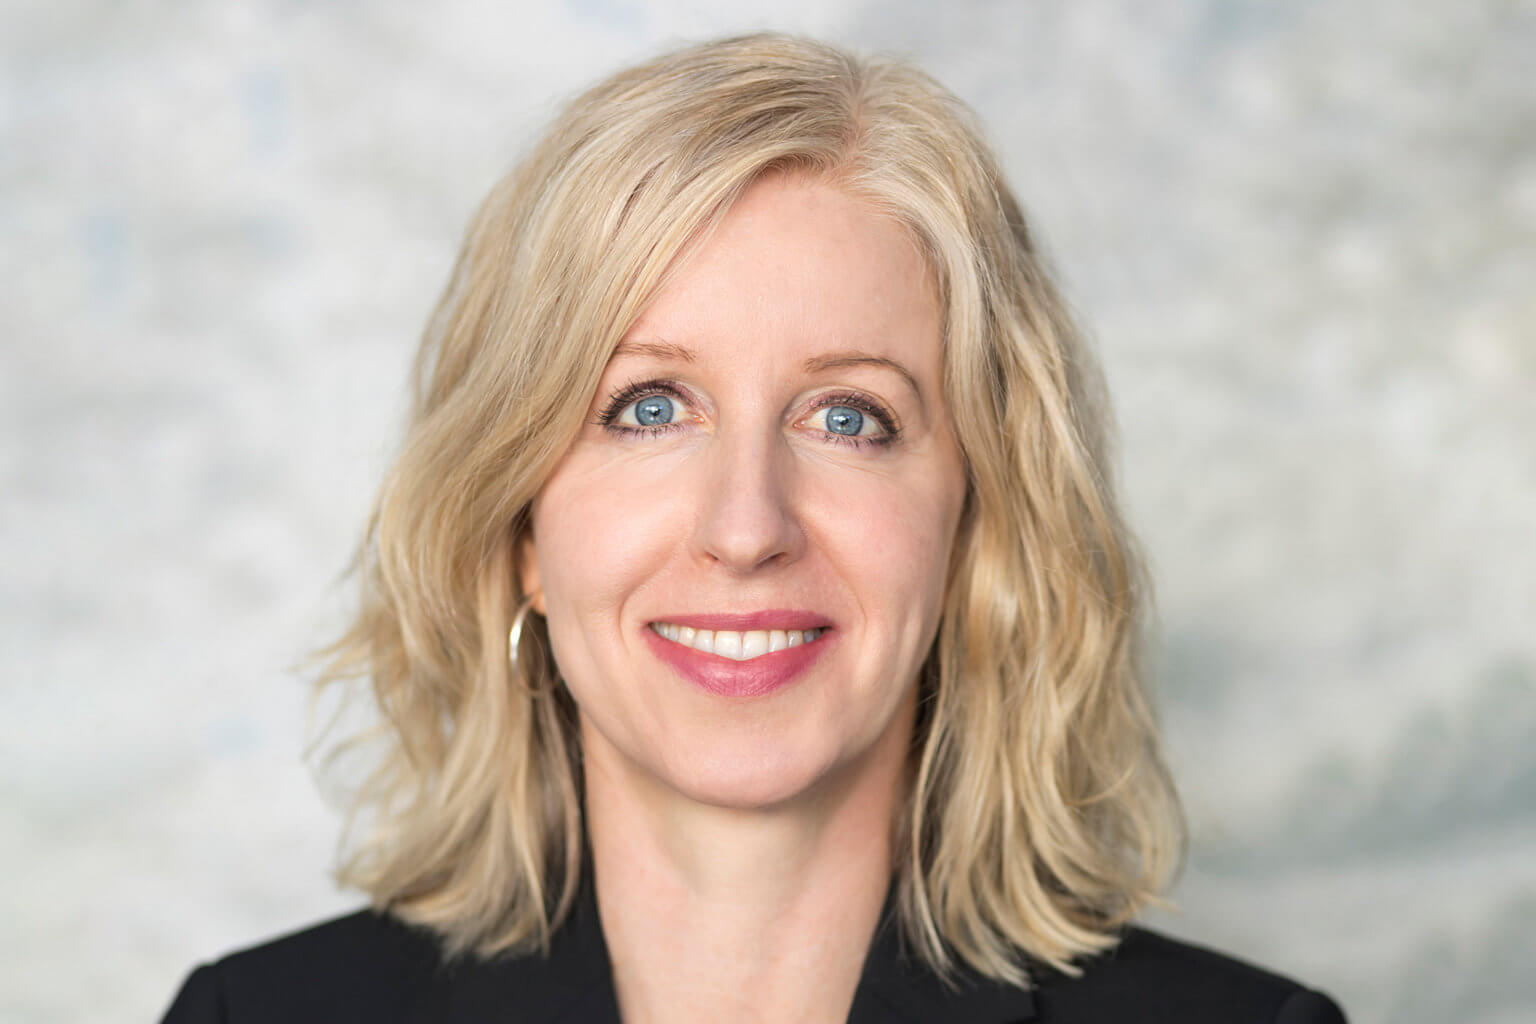 A corporate headshot profile picture of a woman.